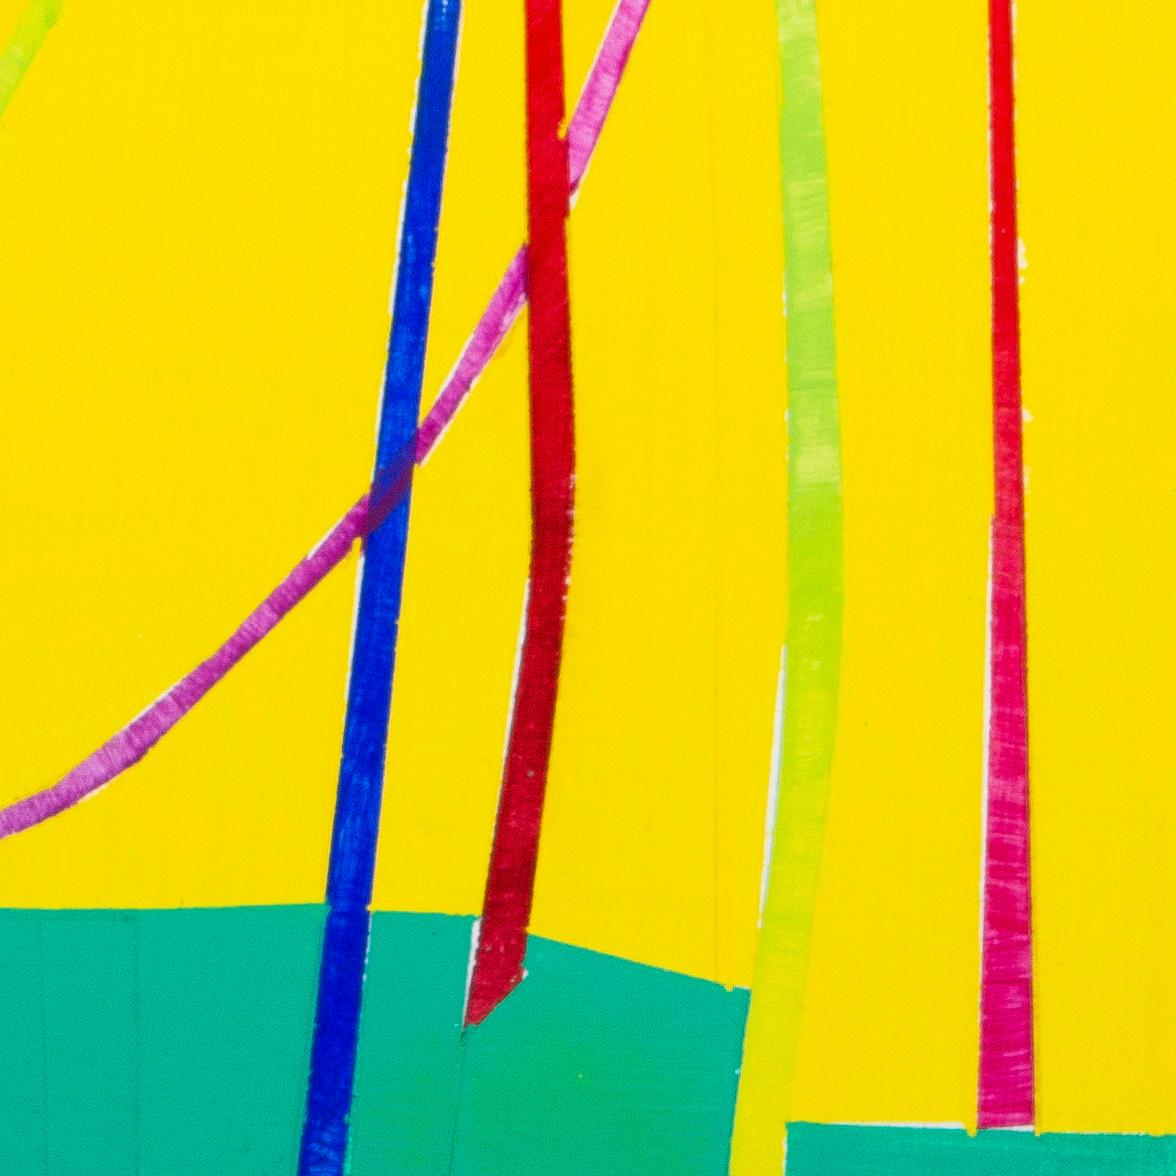 Bikini Catenary: panel painting w/ multi-colored arc lines on yellow & green - Painting by Paula Cahill